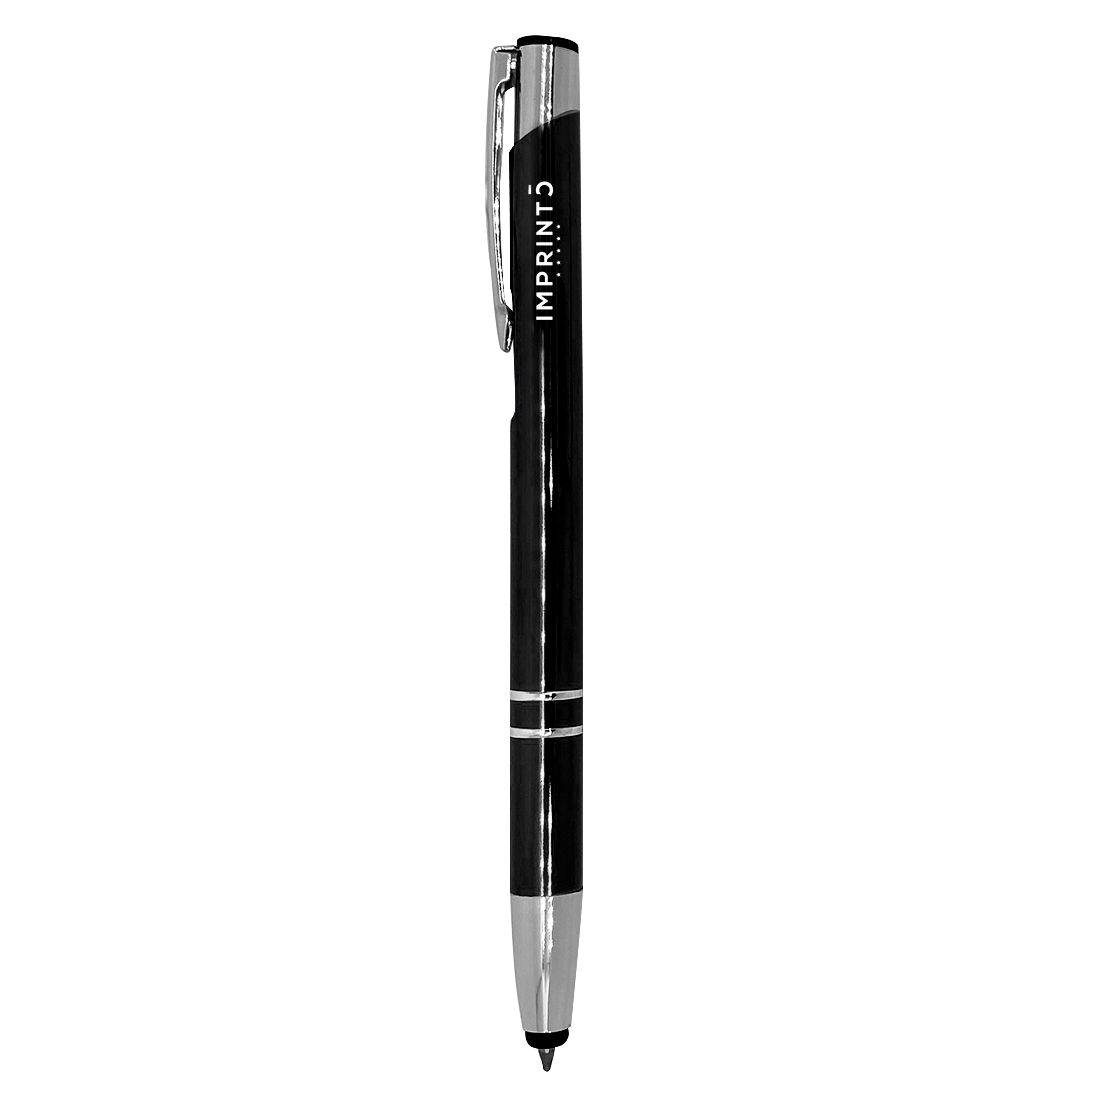 Custom Soft Touch Paragon Pen with Stylus Tip